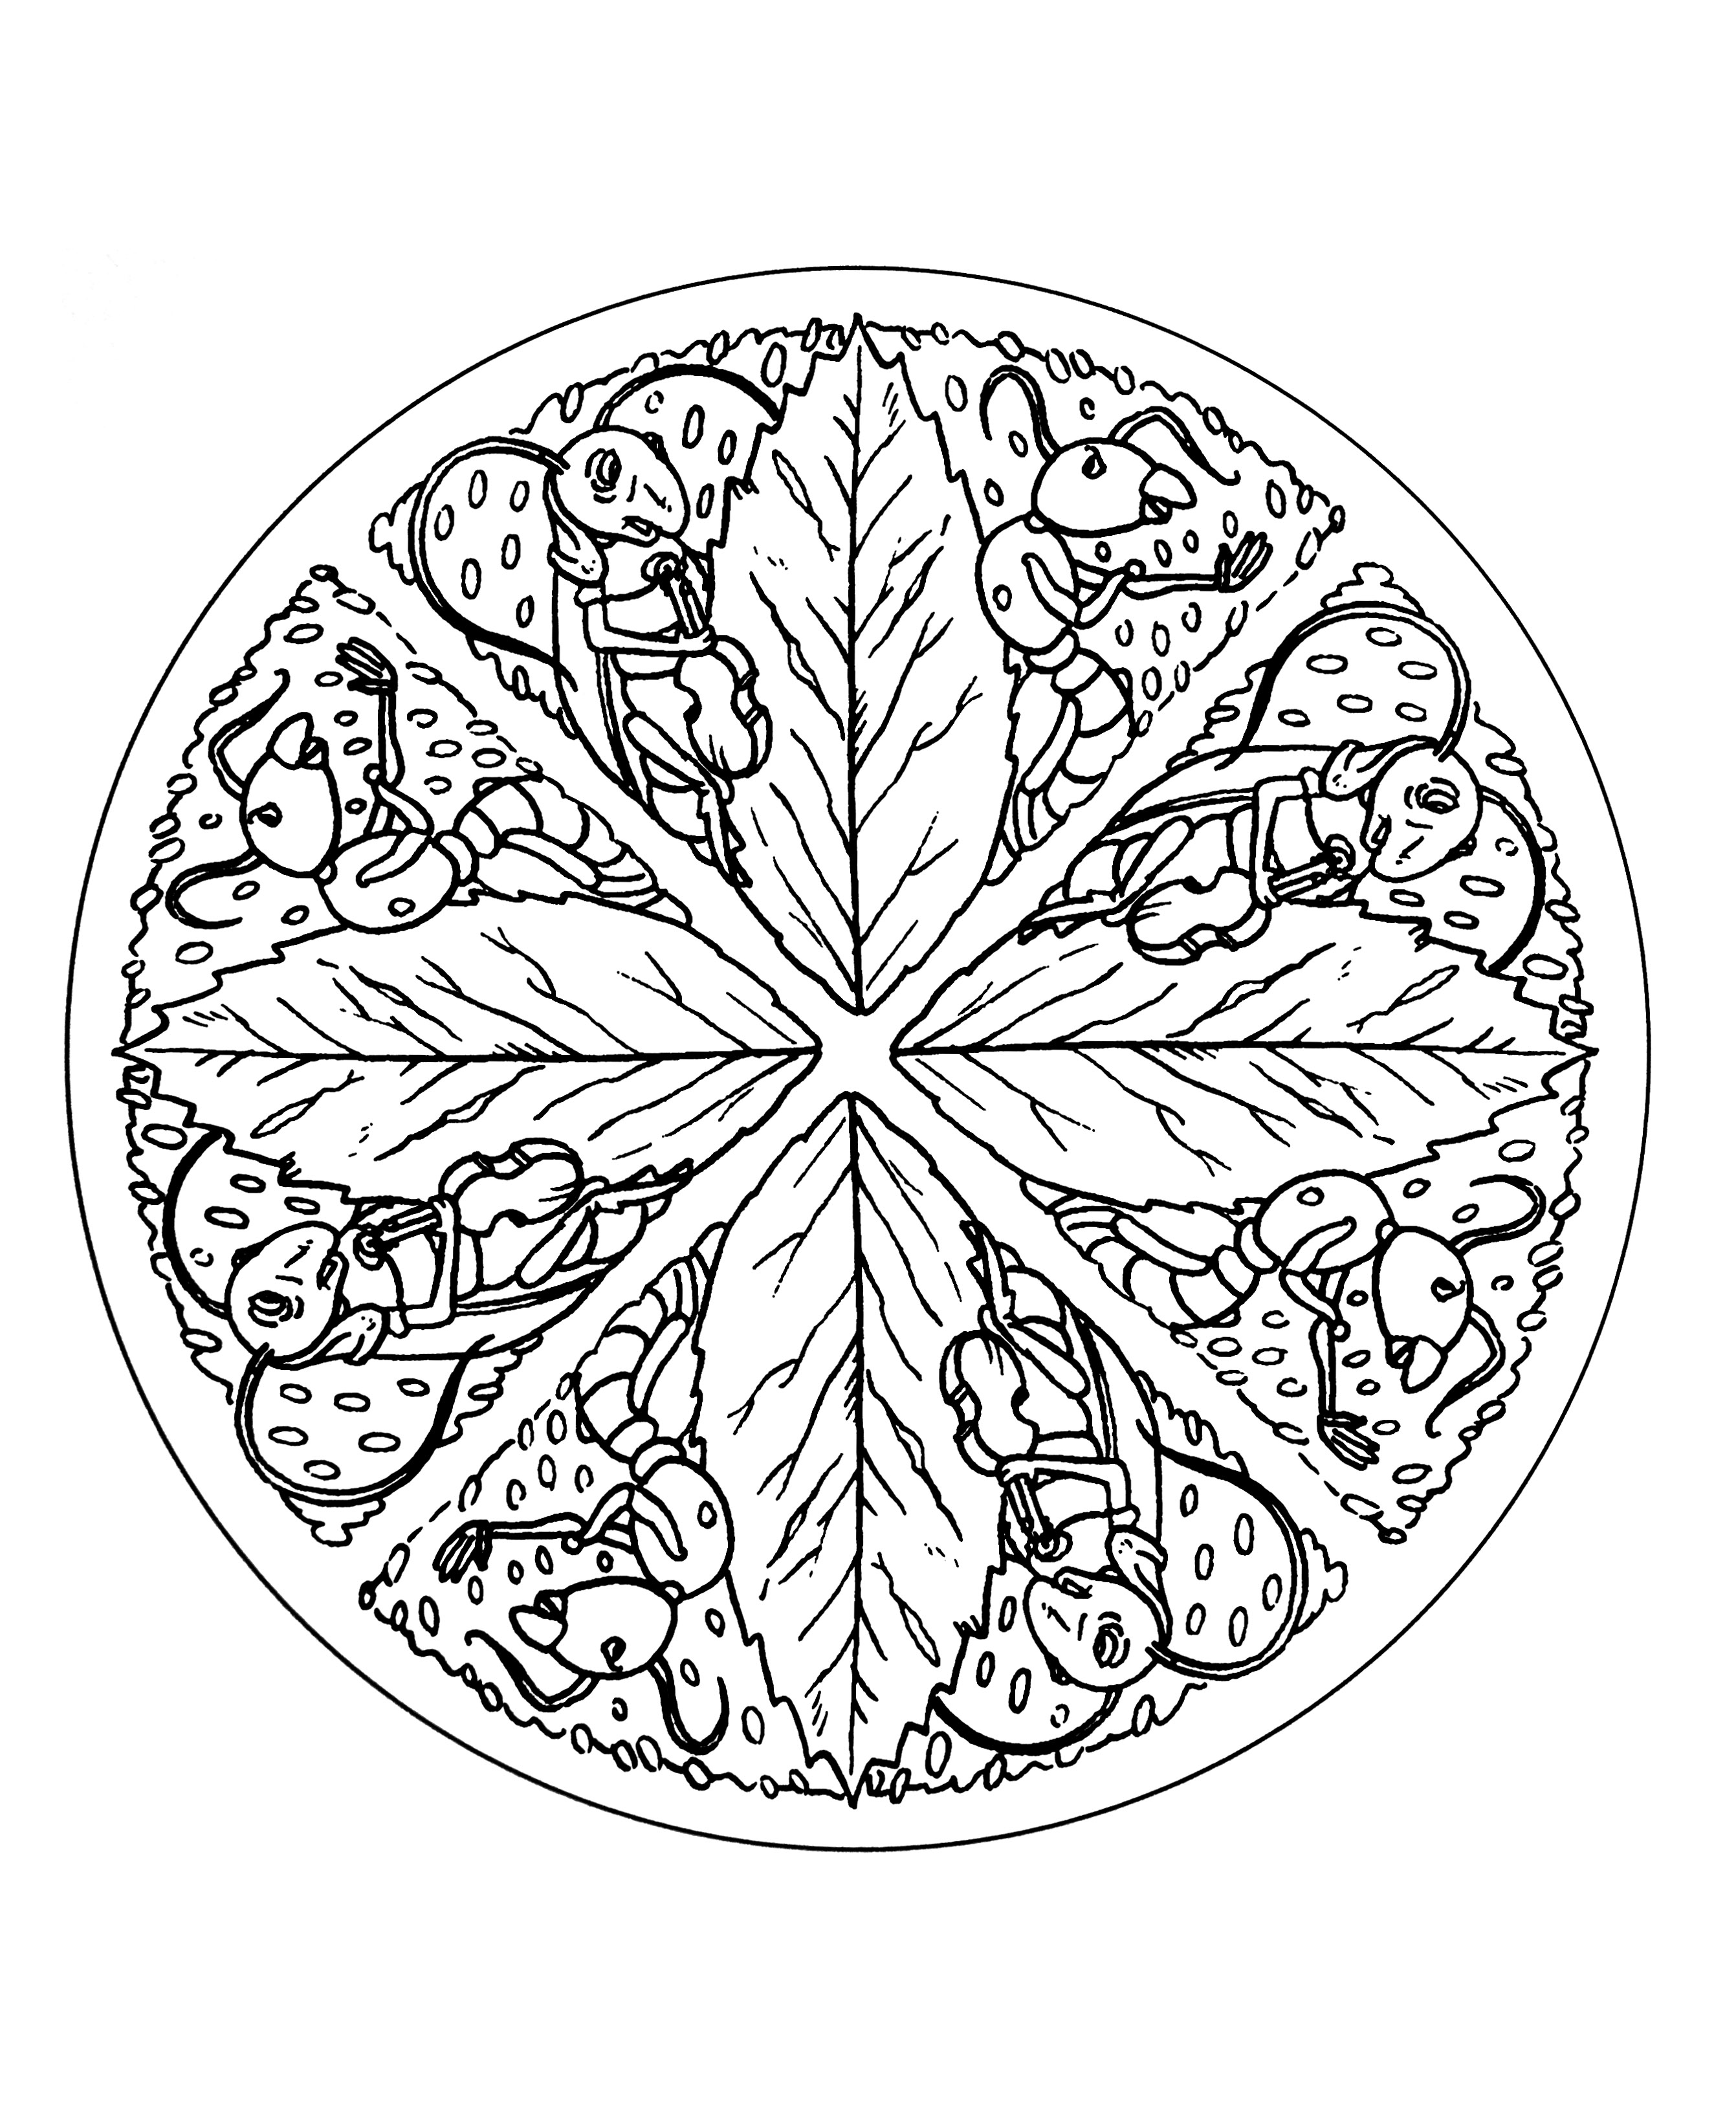 Mandala drawing with Ants and Leaves. A magnificent vegetation invades this magnificent Mandala : flowers, leaves ... Do whatever it takes to get rid of any distractions that may interfere with your coloring.